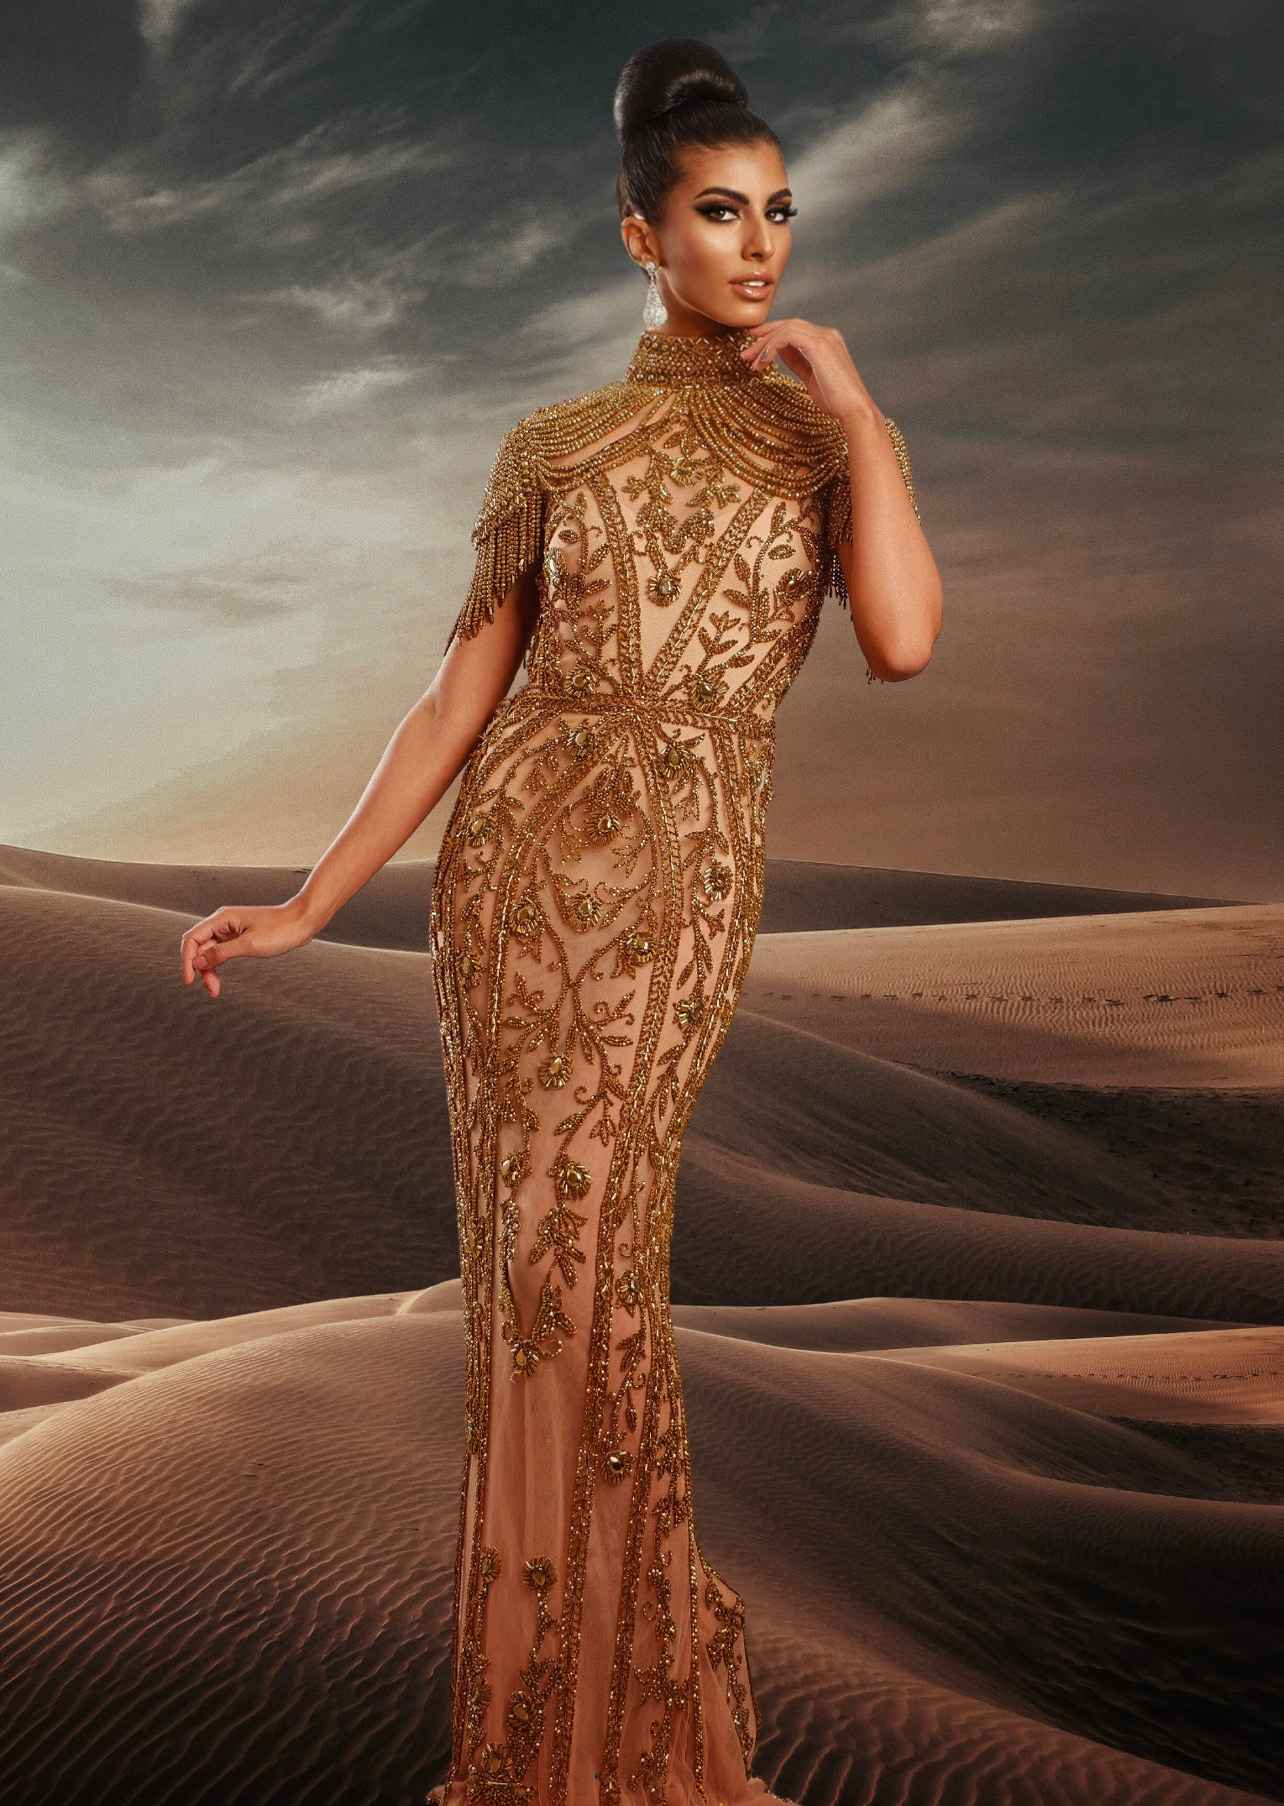 Miss Egypt by Furne One